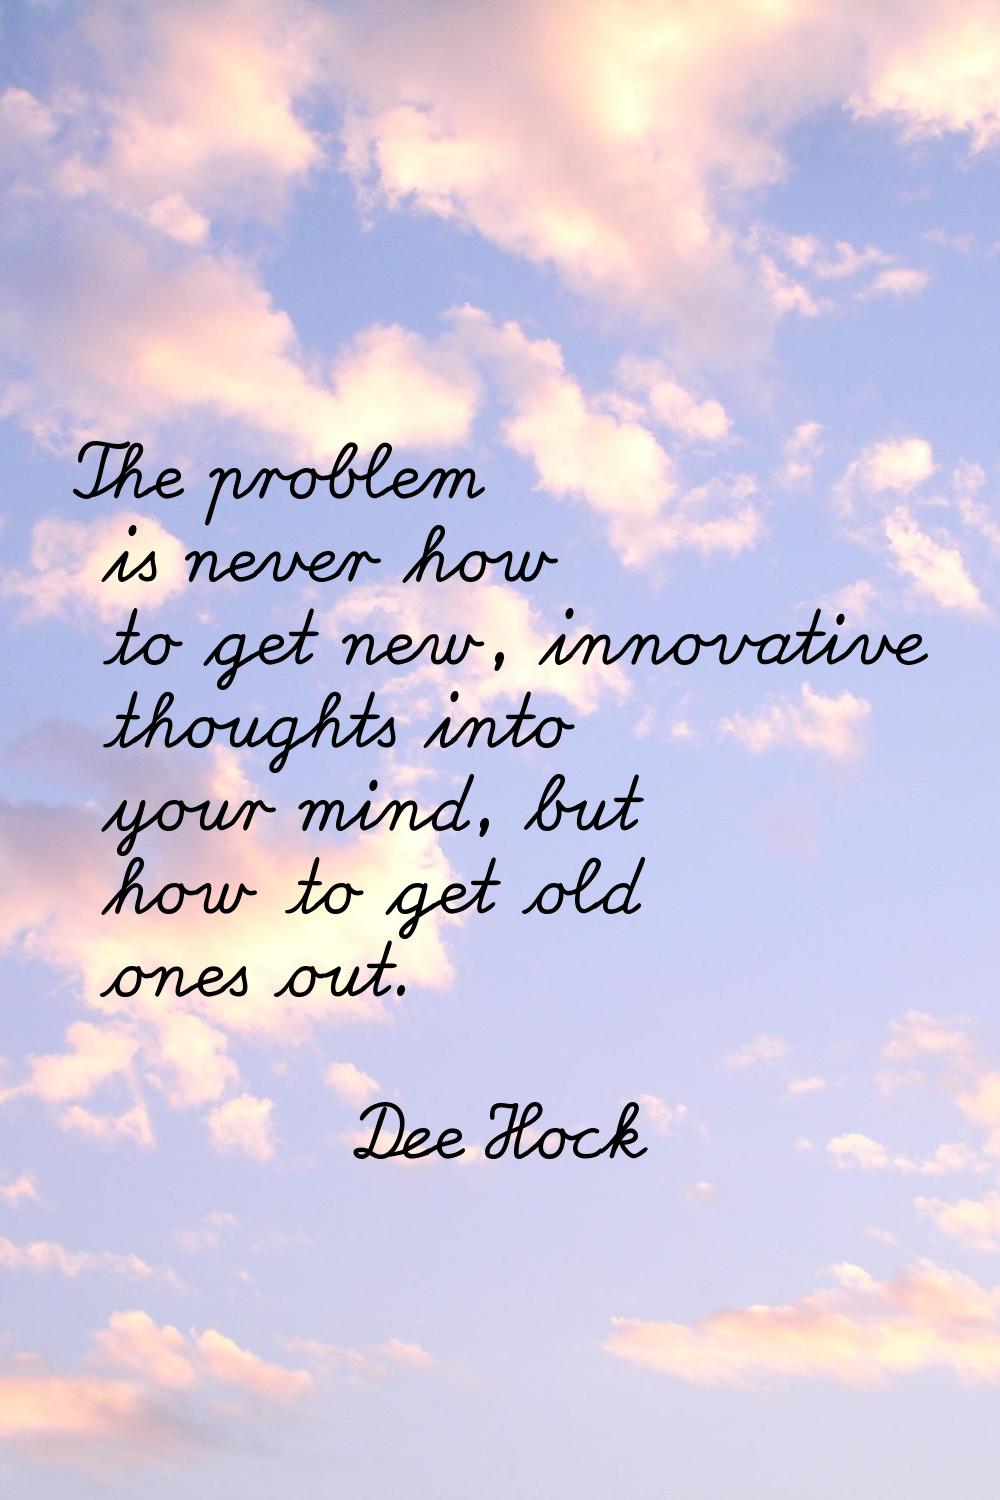 The problem is never how to get new, innovative thoughts into your mind, but how to get old ones ou